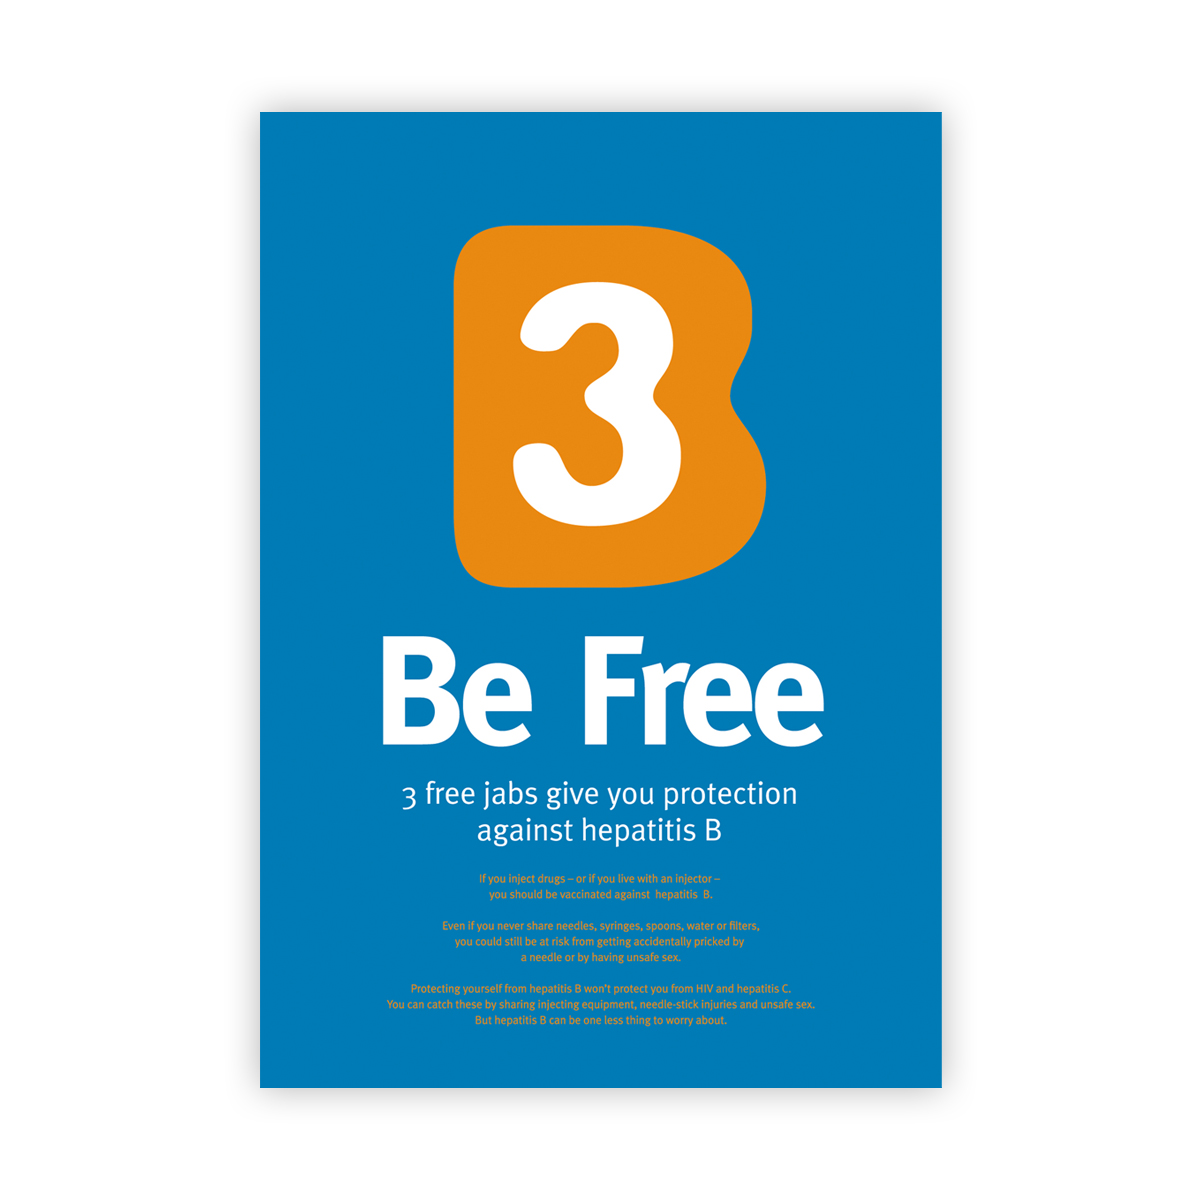 'B3 Be Free' campaign: poster (large)